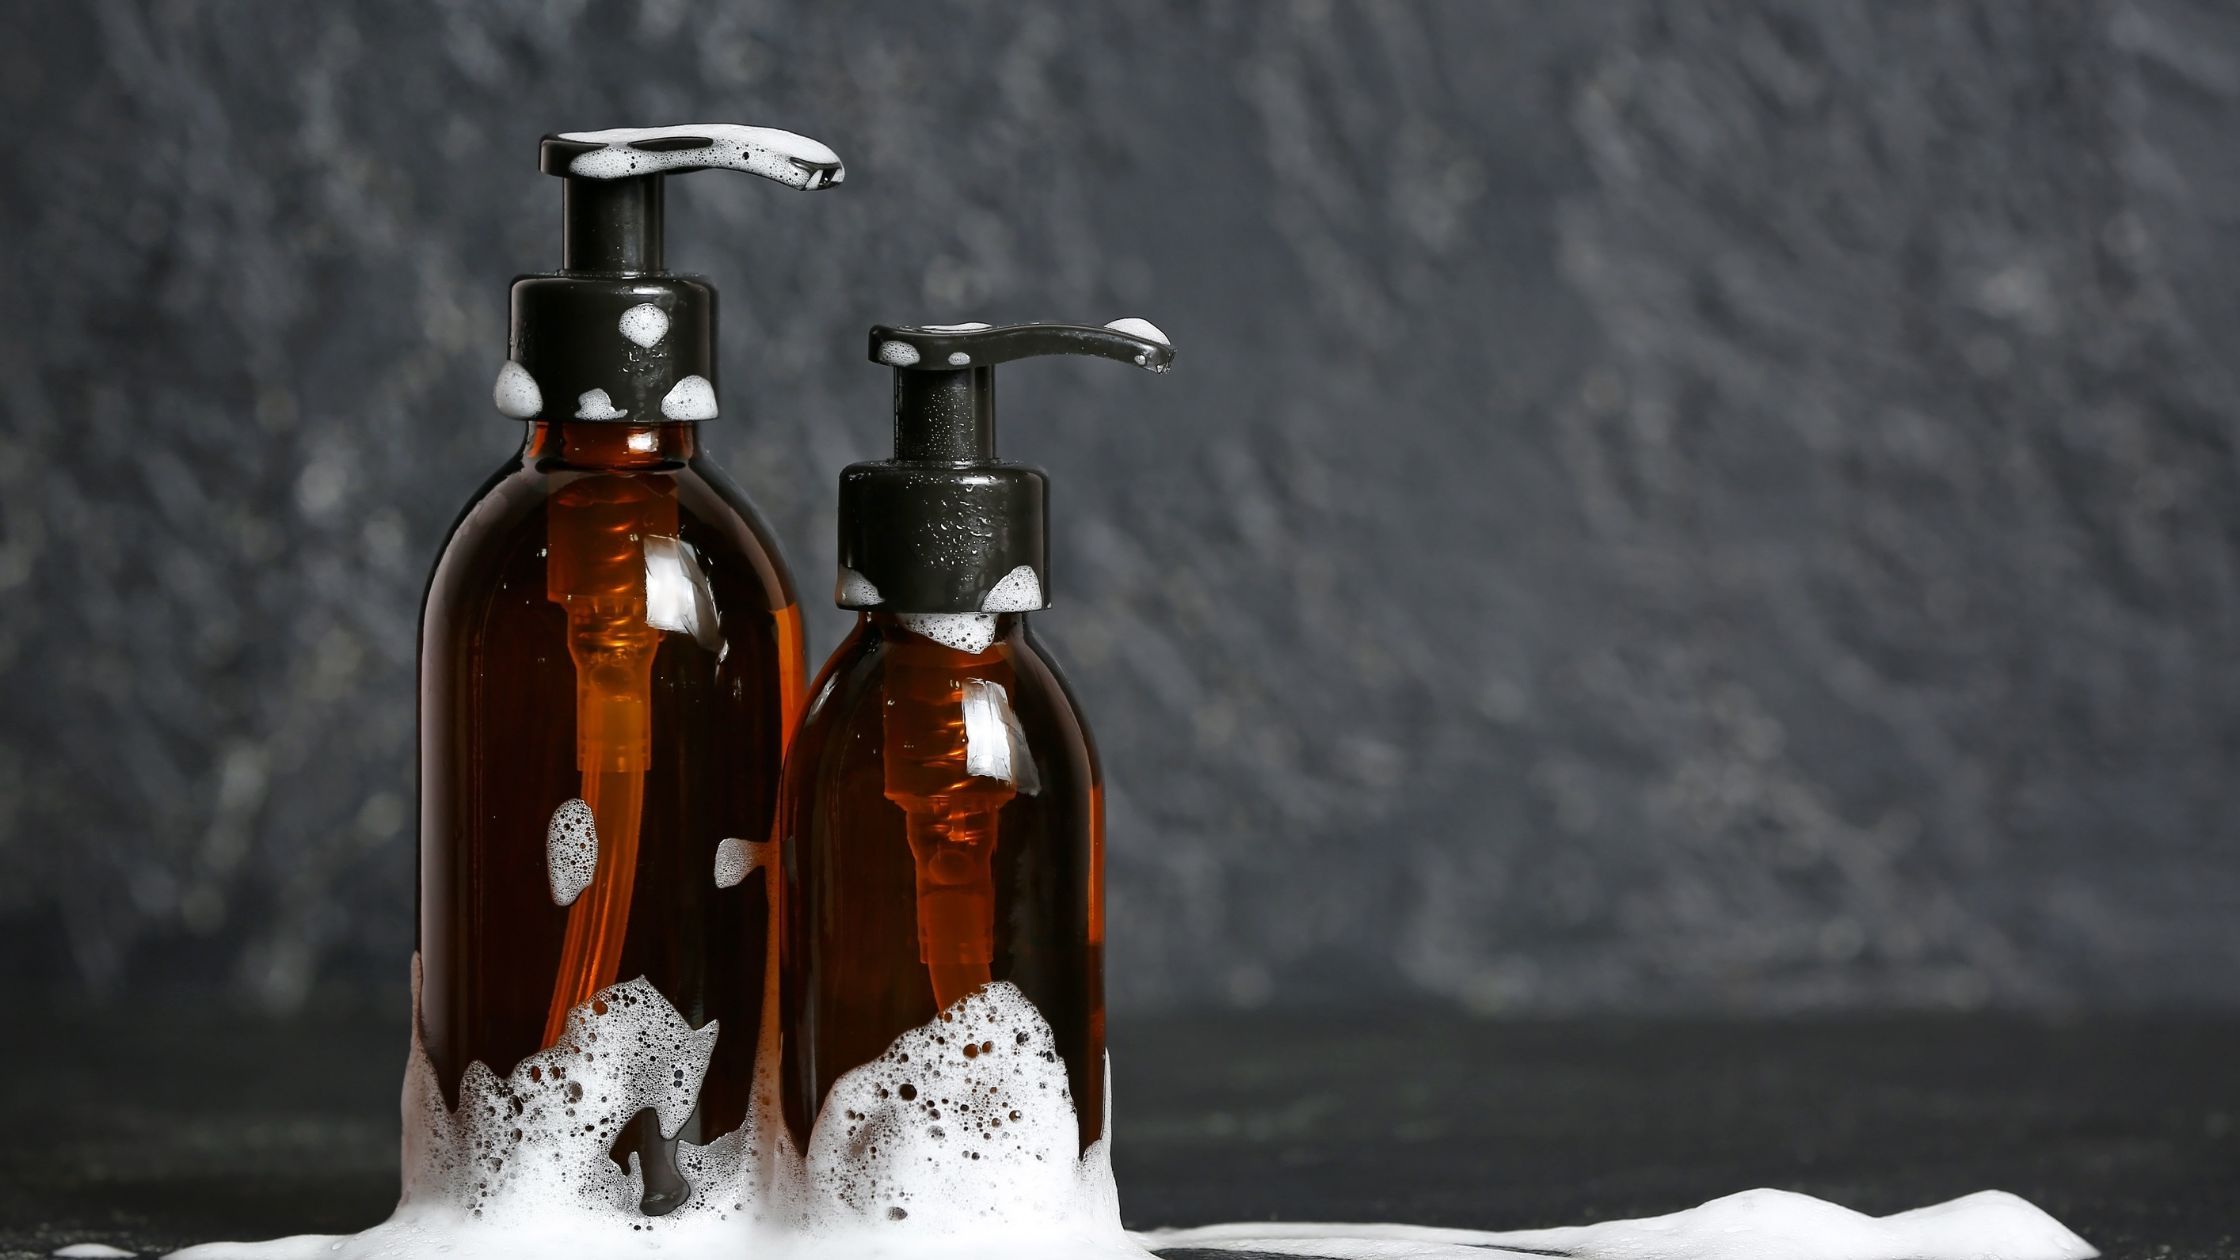 Find Out Where to Buy Empty Shampoo Bottles